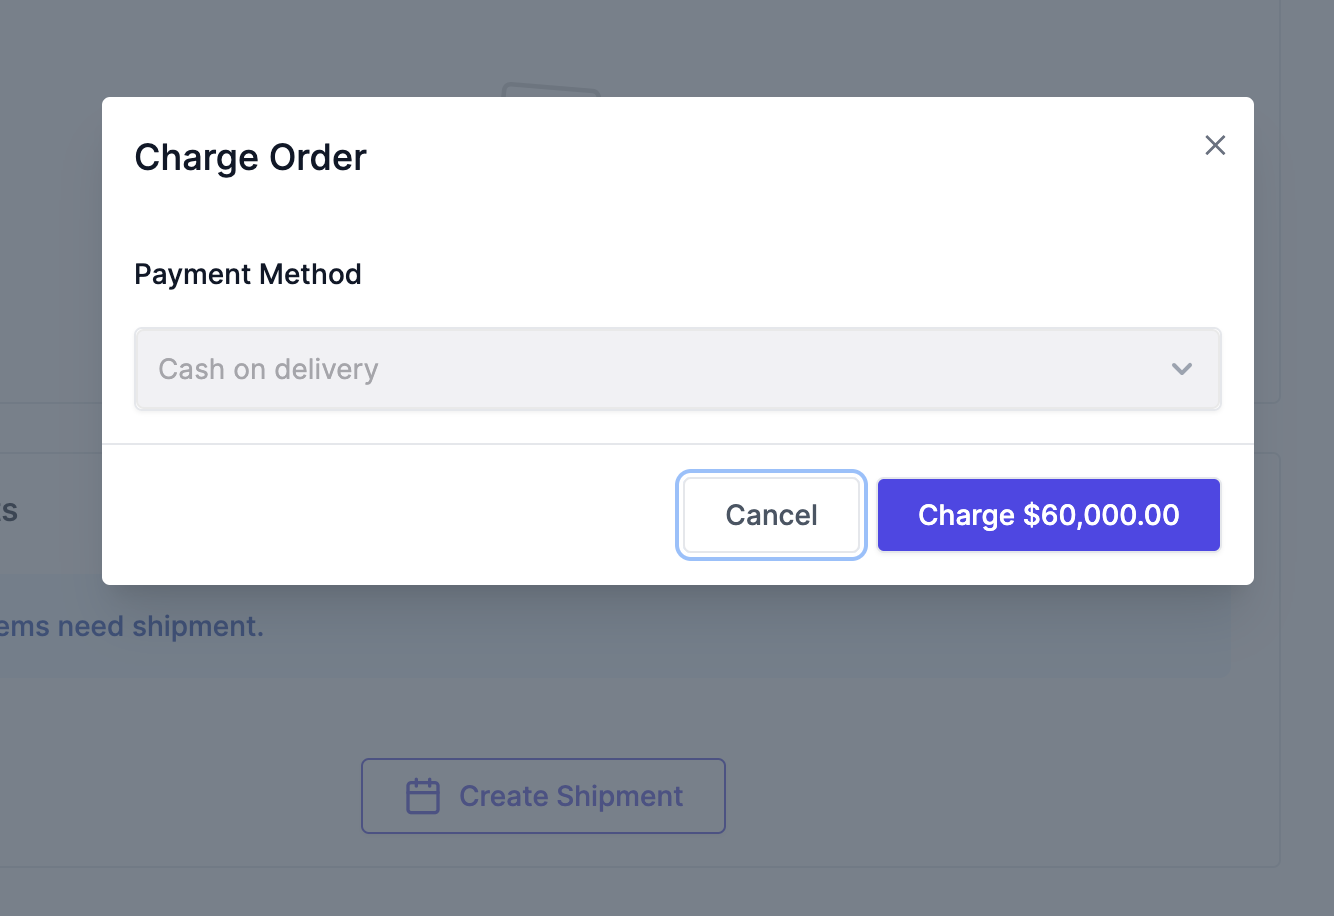 This image shows how to charge order